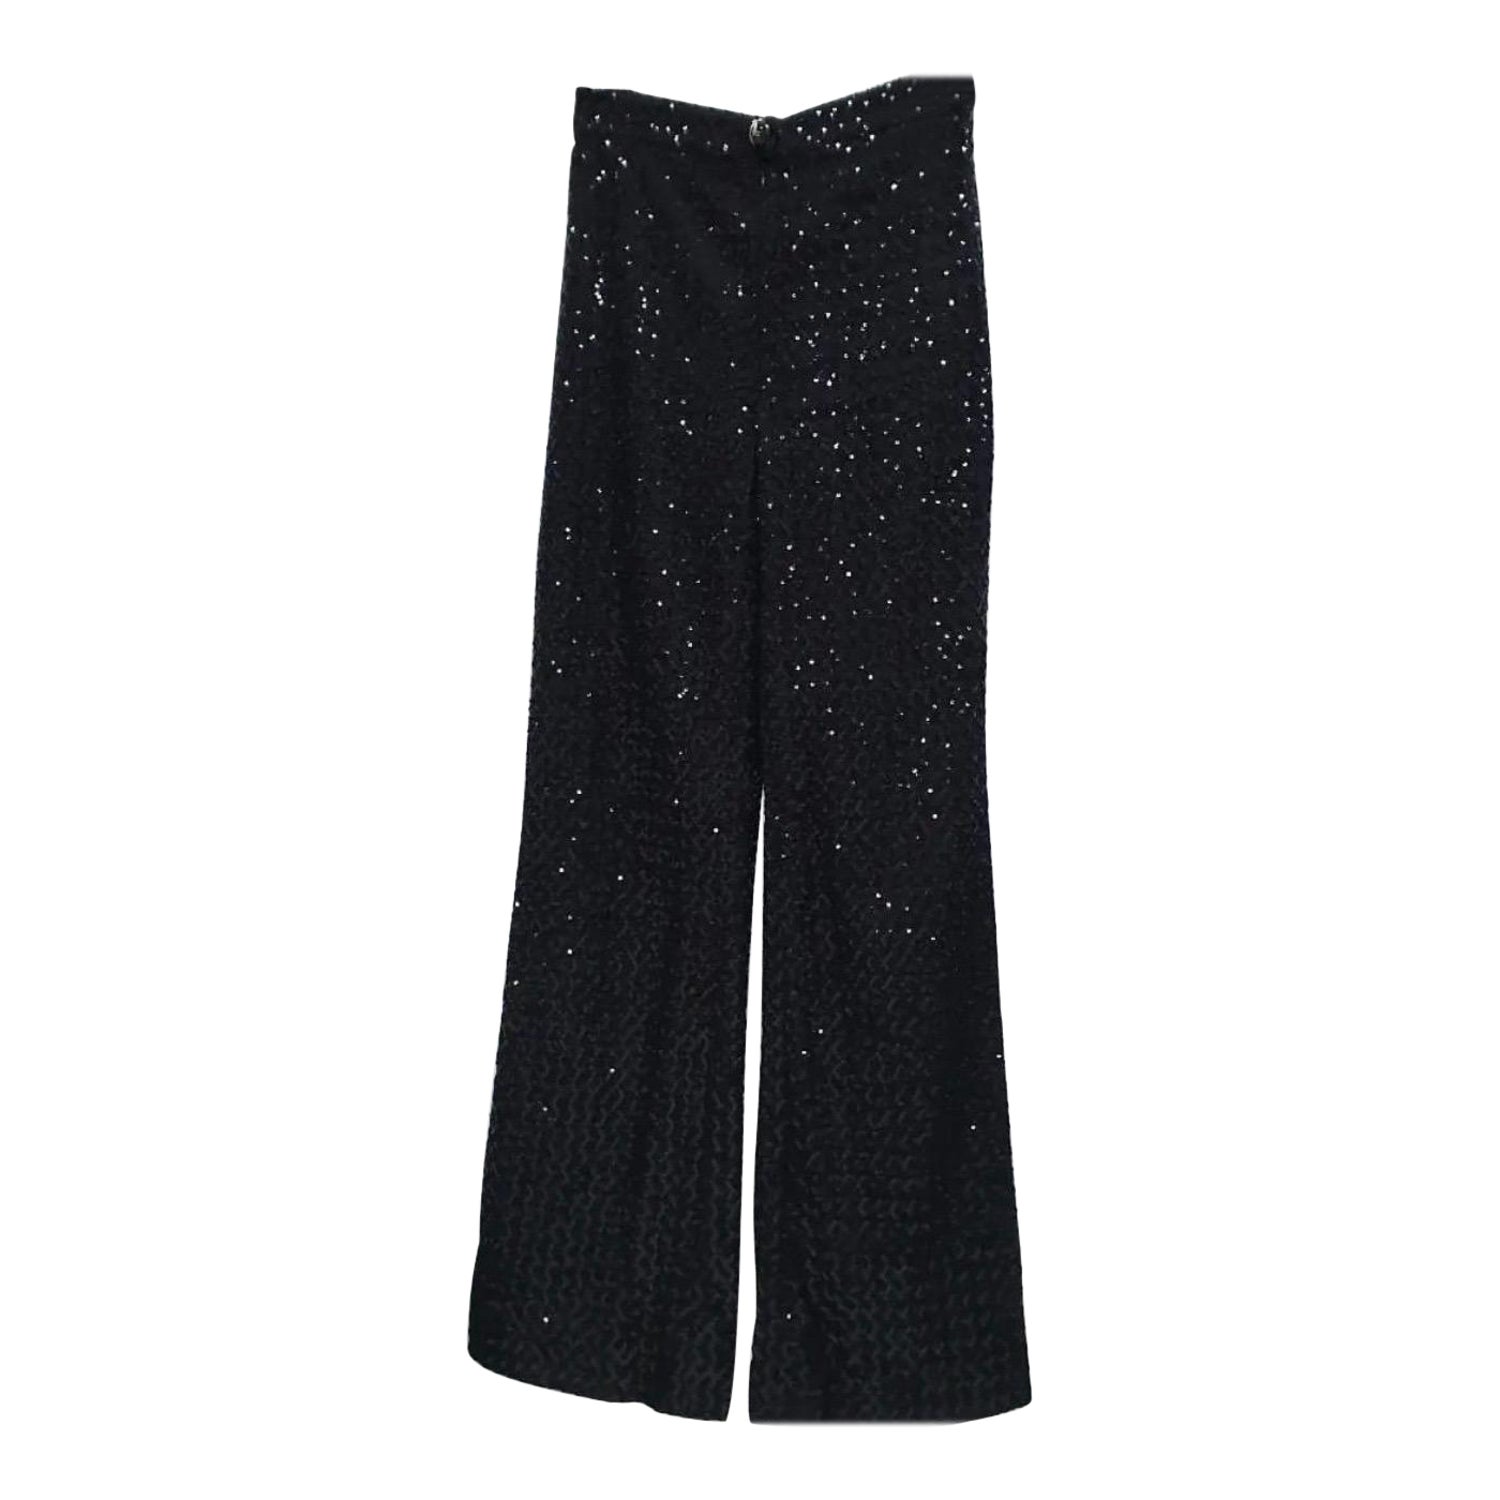 Chanel Sequin Pants - 8 For Sale on 1stDibs